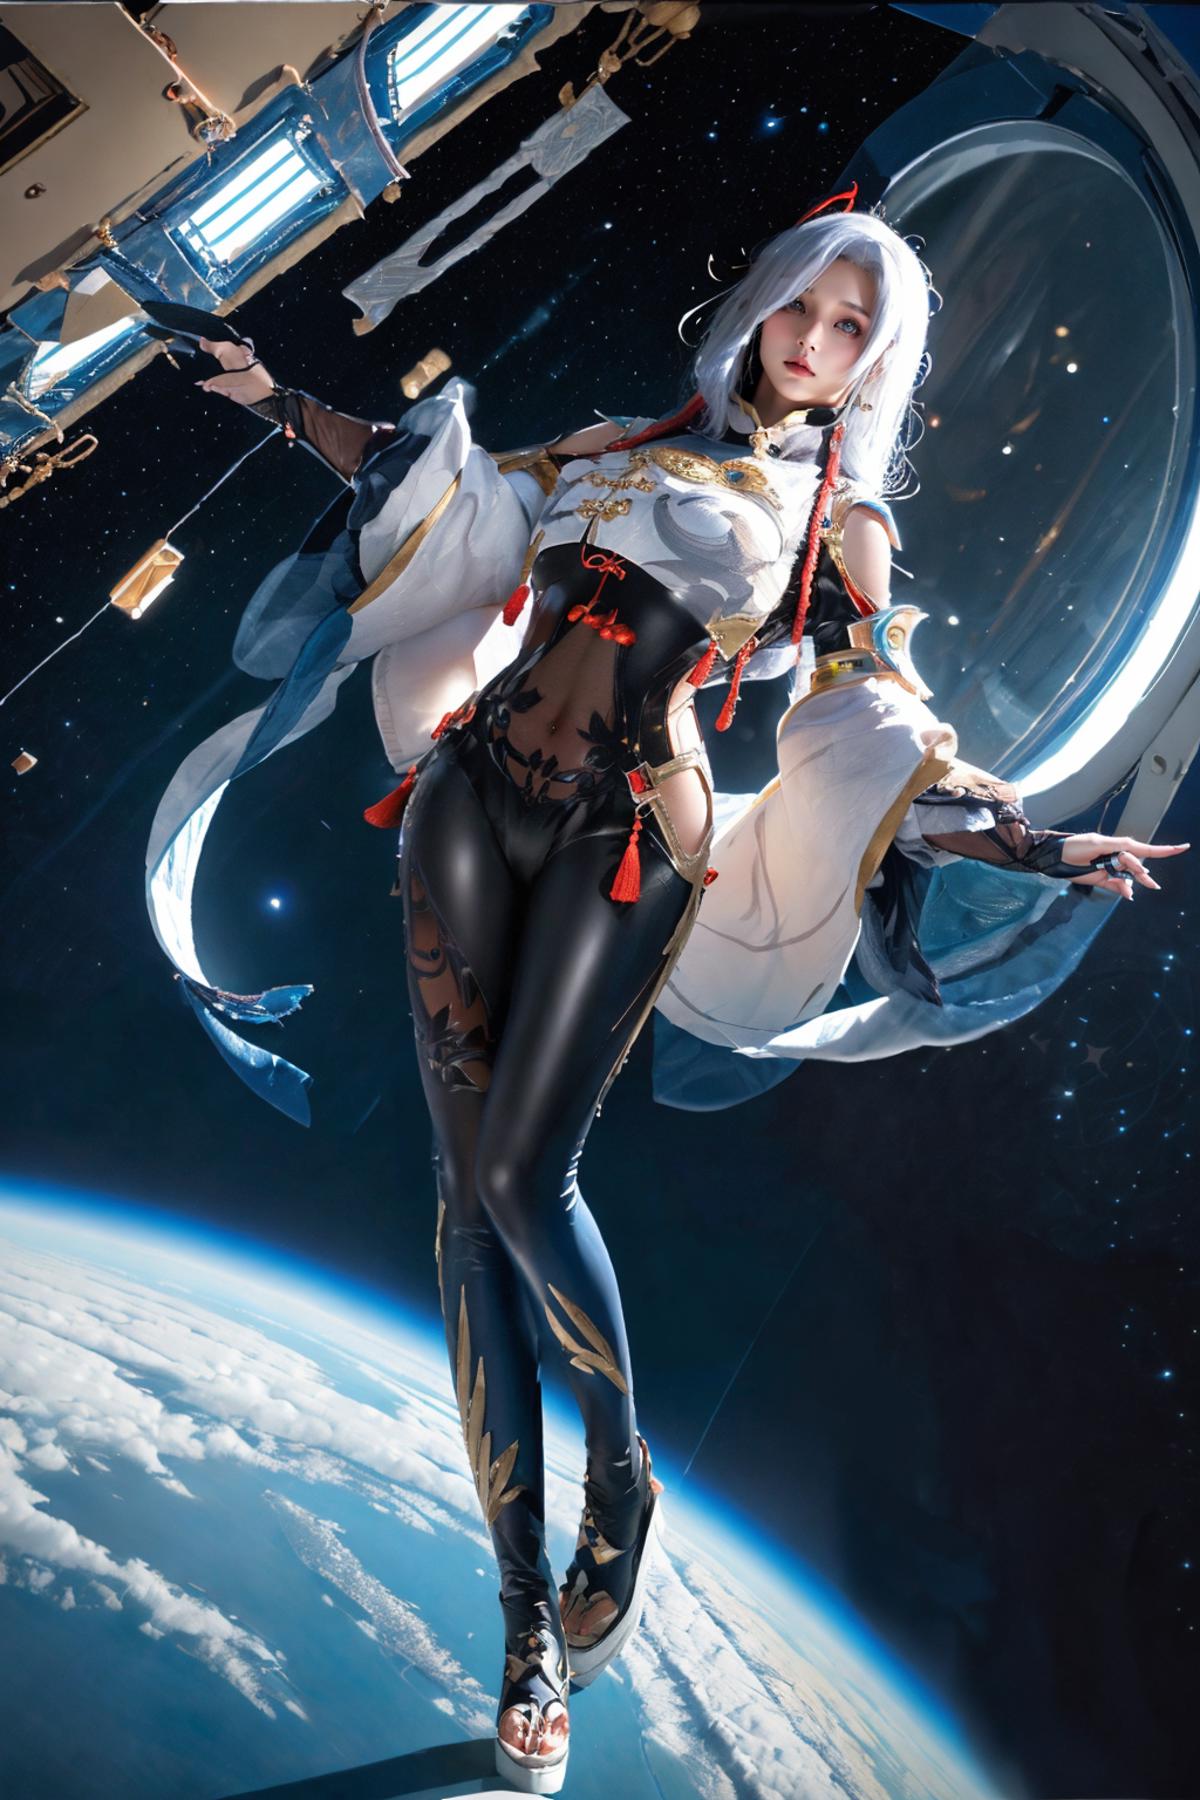 [Realistic] <Genshin Impact> Cosplay costume collection | 原神 cos 服装集合 image by Darknoice